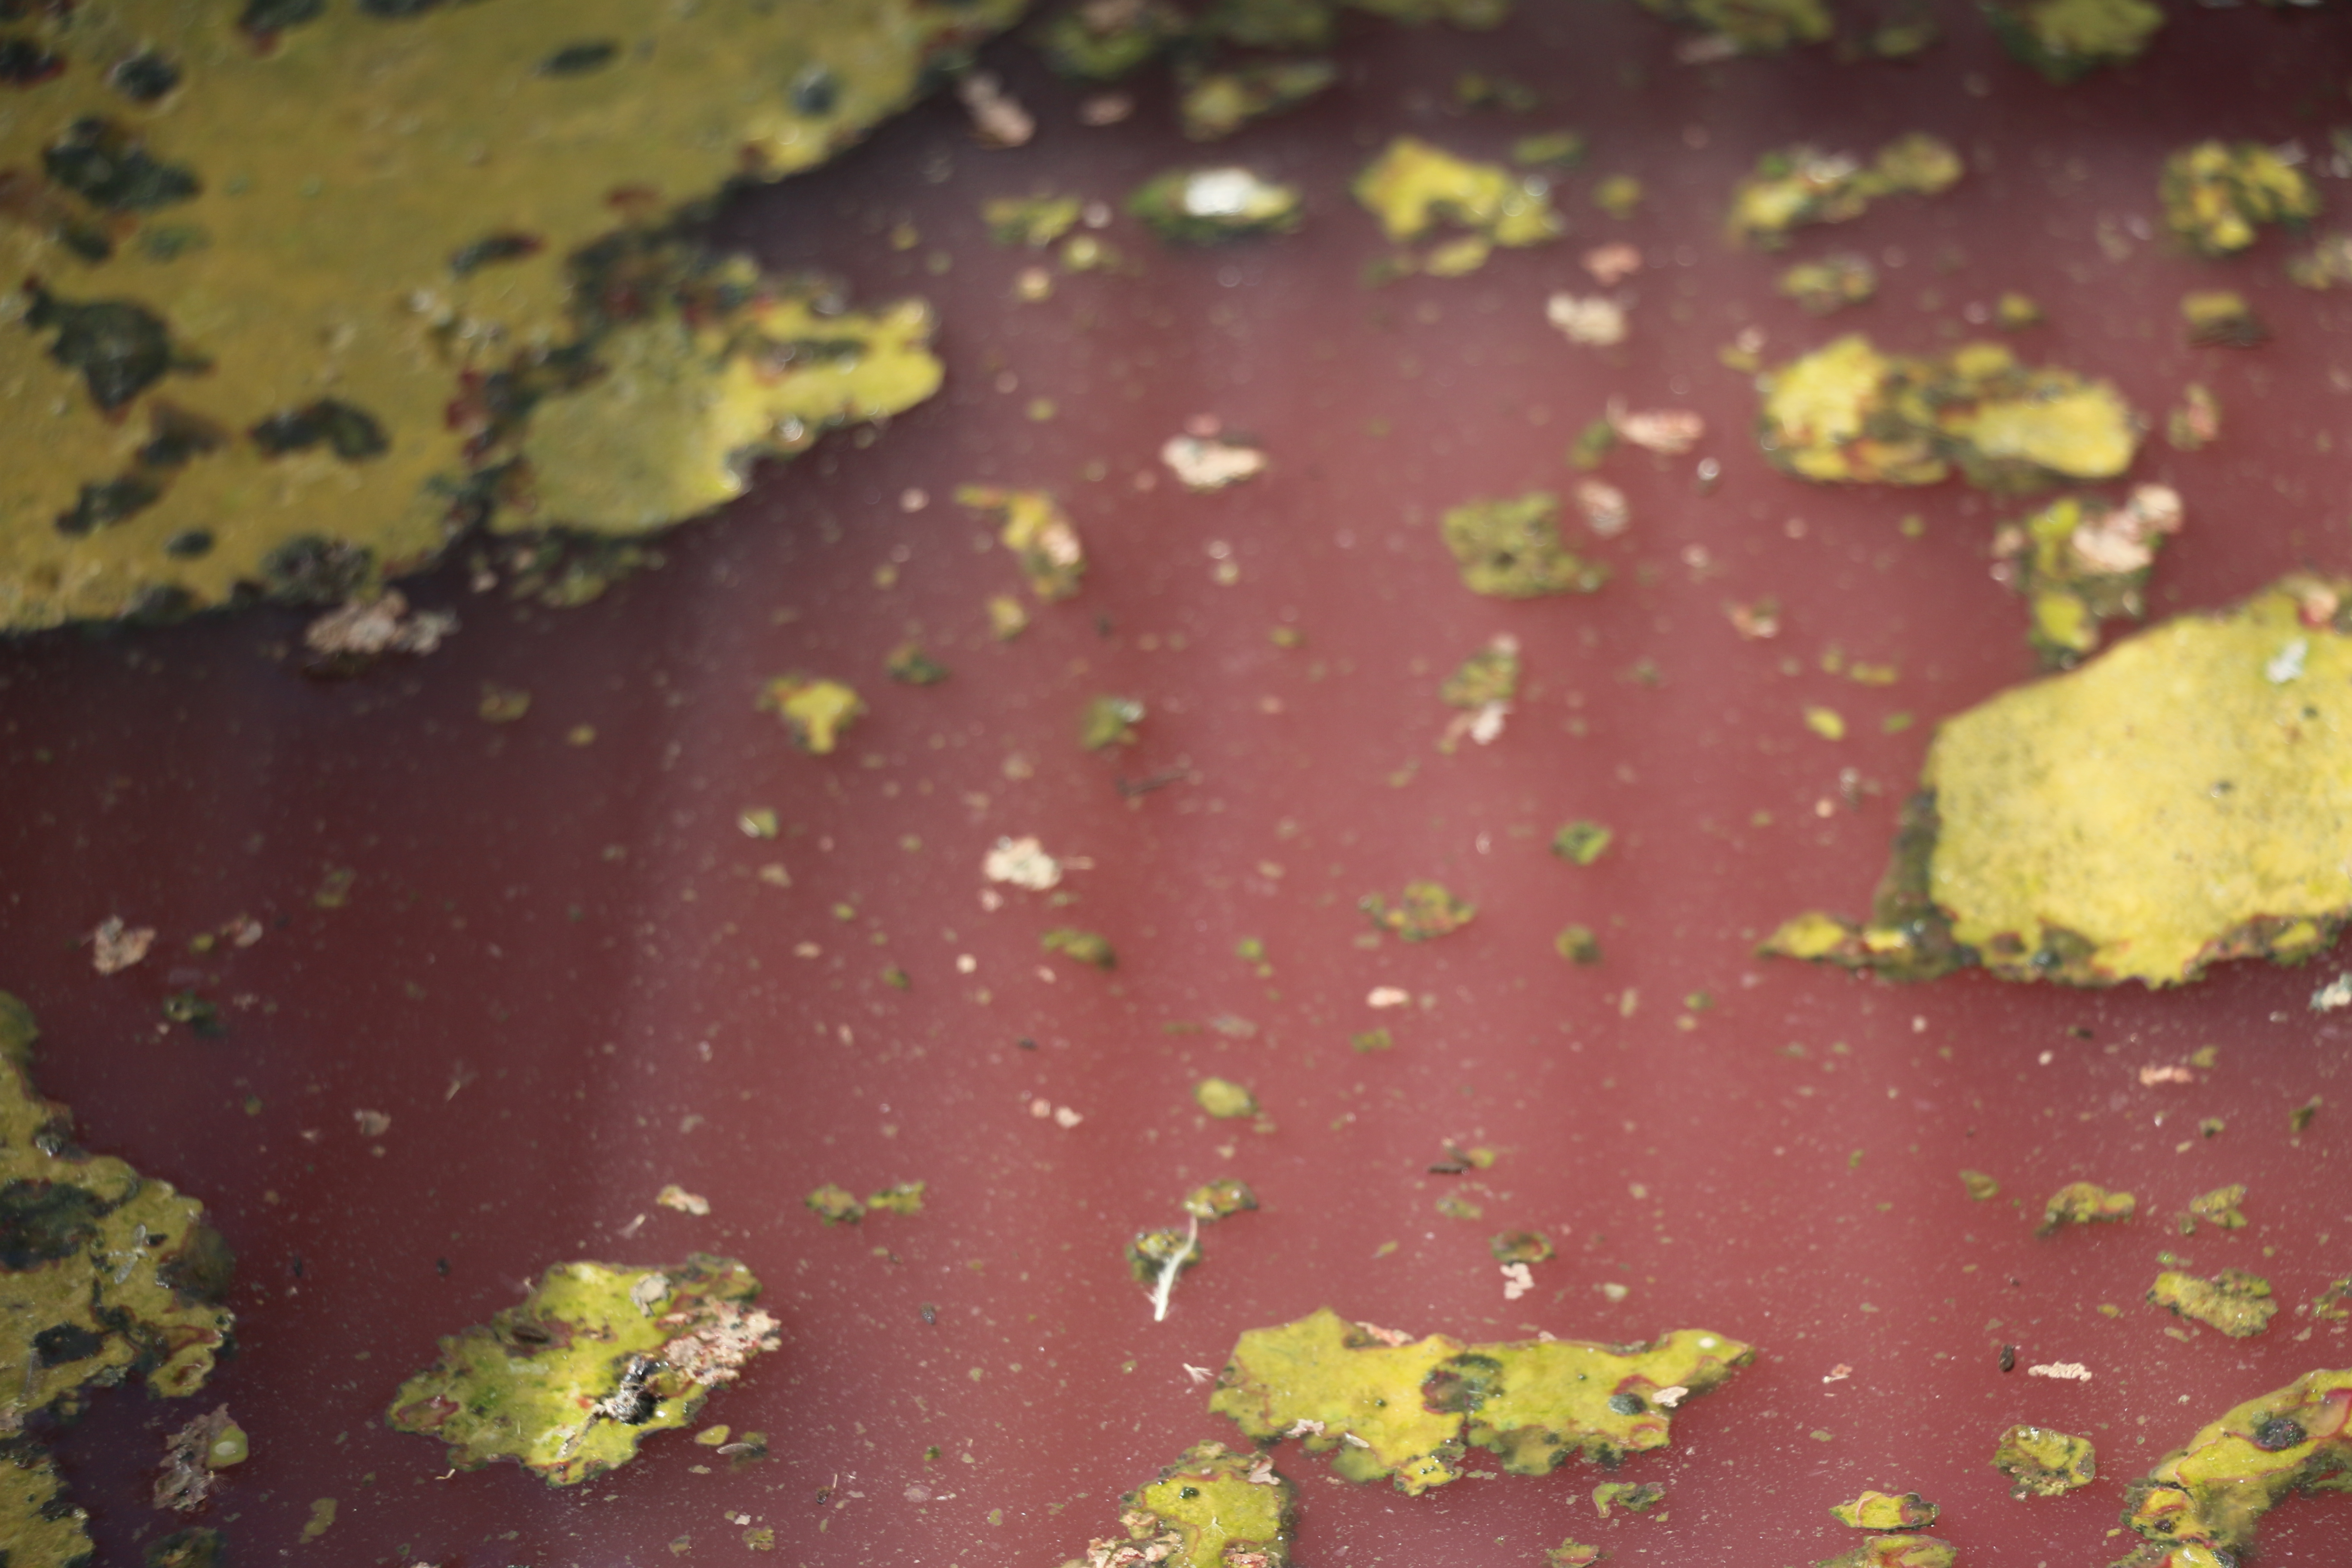 Copyright : Camille ESCOFFIER/CEA<br /> The red color in the PhytoBarre storage tank indicates the presence of photosyntetical bacteria. <br /> The addition of bacteria triggers the formation of a complex ecosystem including algae.  